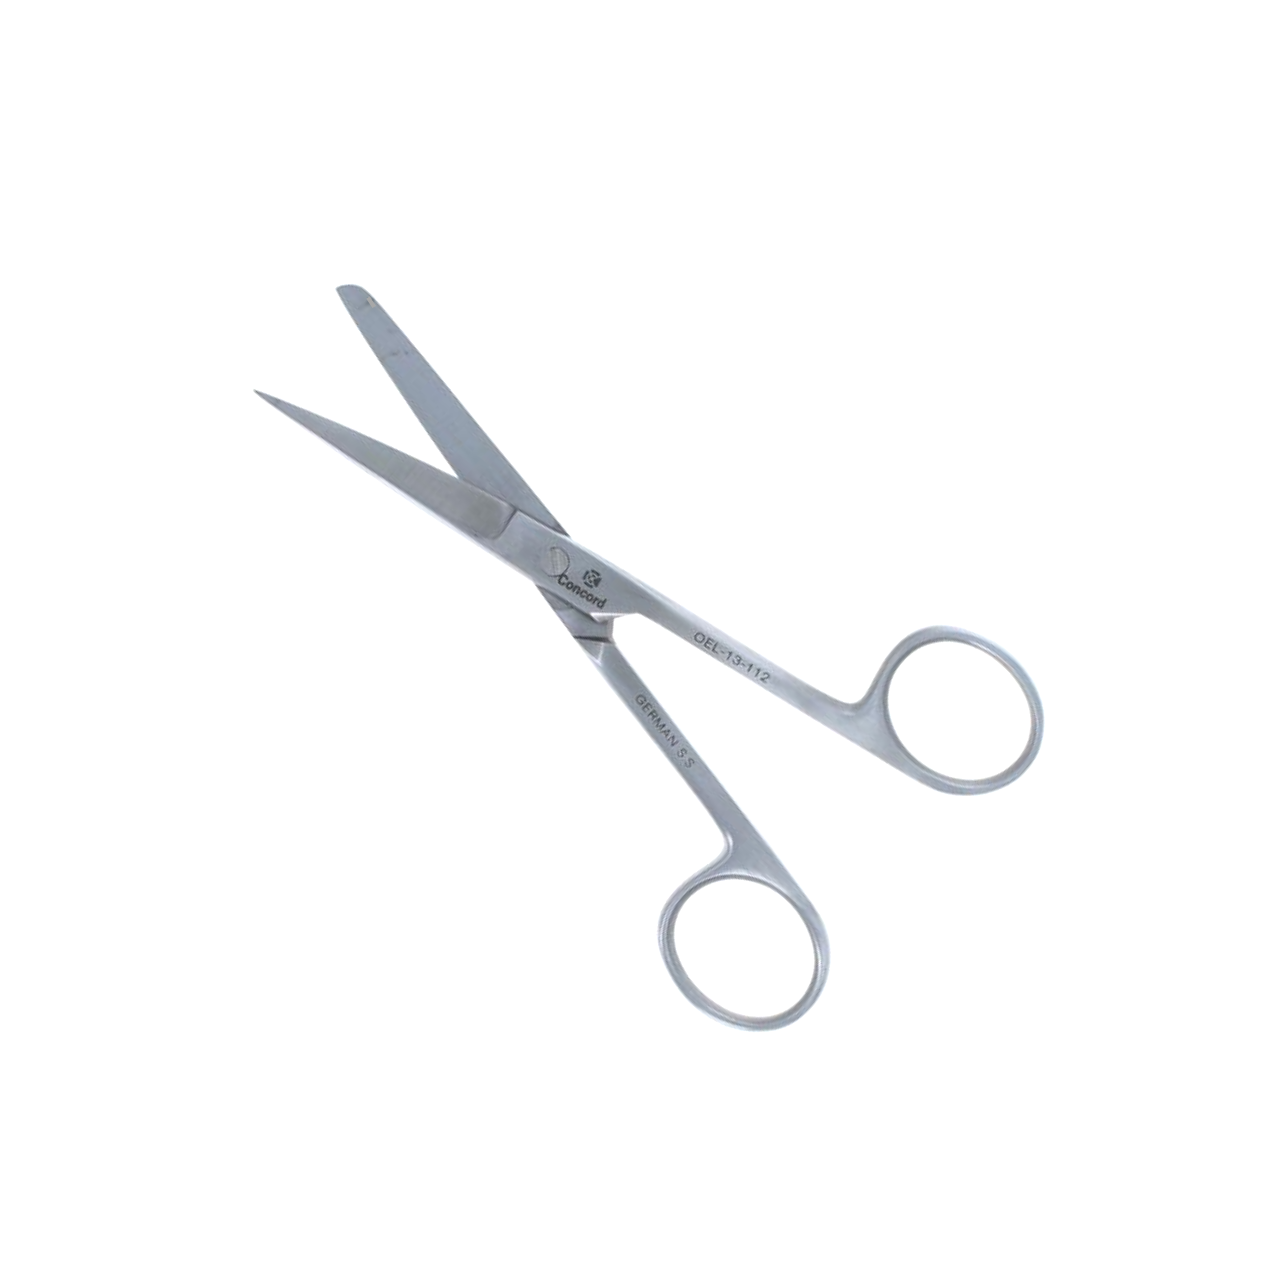 Surgical Scissors-Blunt-Sharp Brand May Vary - Health